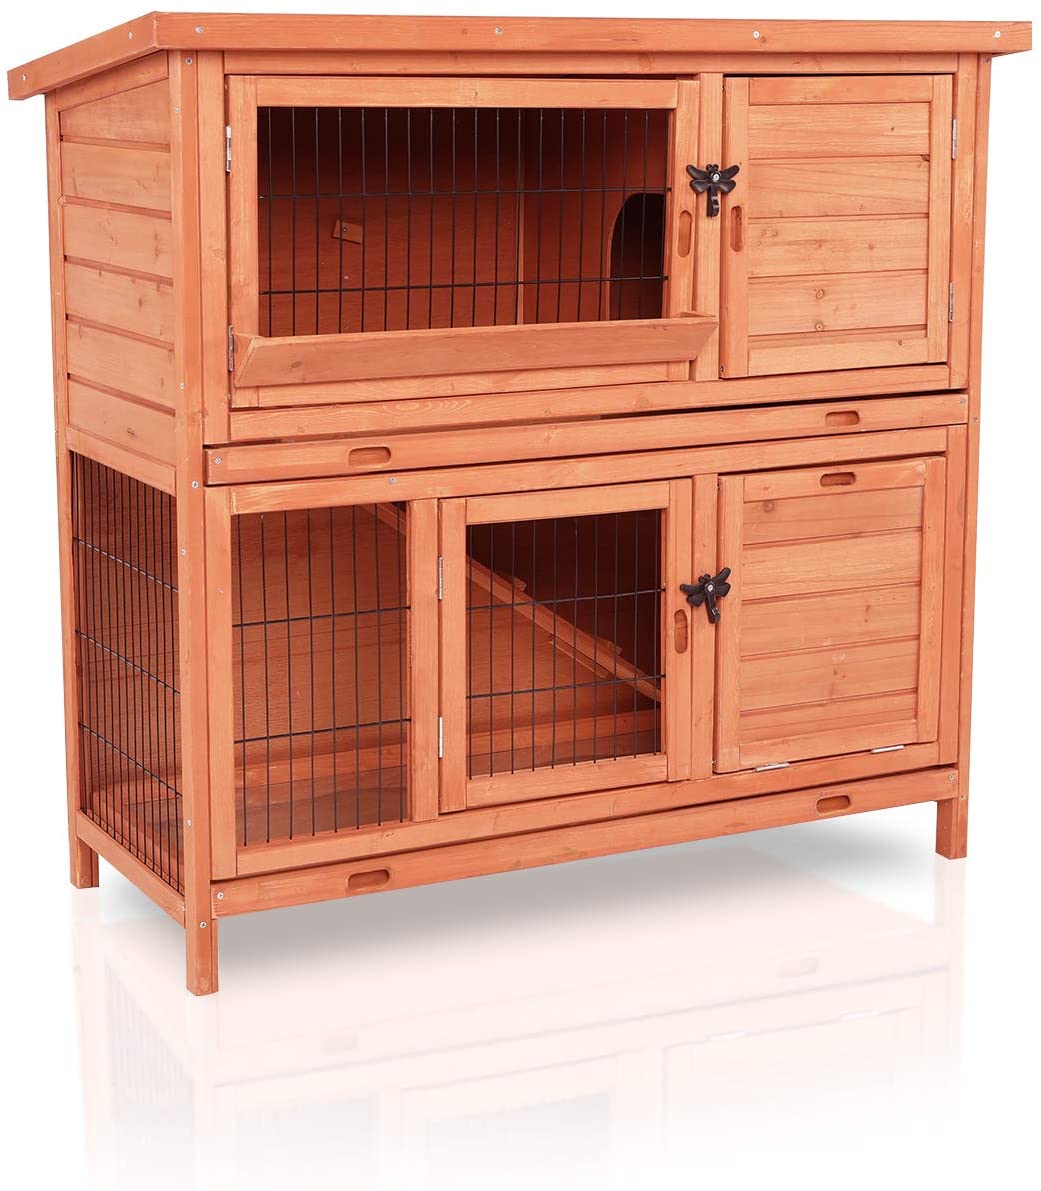 LAZY BUDDY Rabbit Hutch Wooden Rabbit Cage Indoor Outdoor Backyard Bunny Small Animal Cage with Waterproof Roof & Removable Tray - image 1 of 7